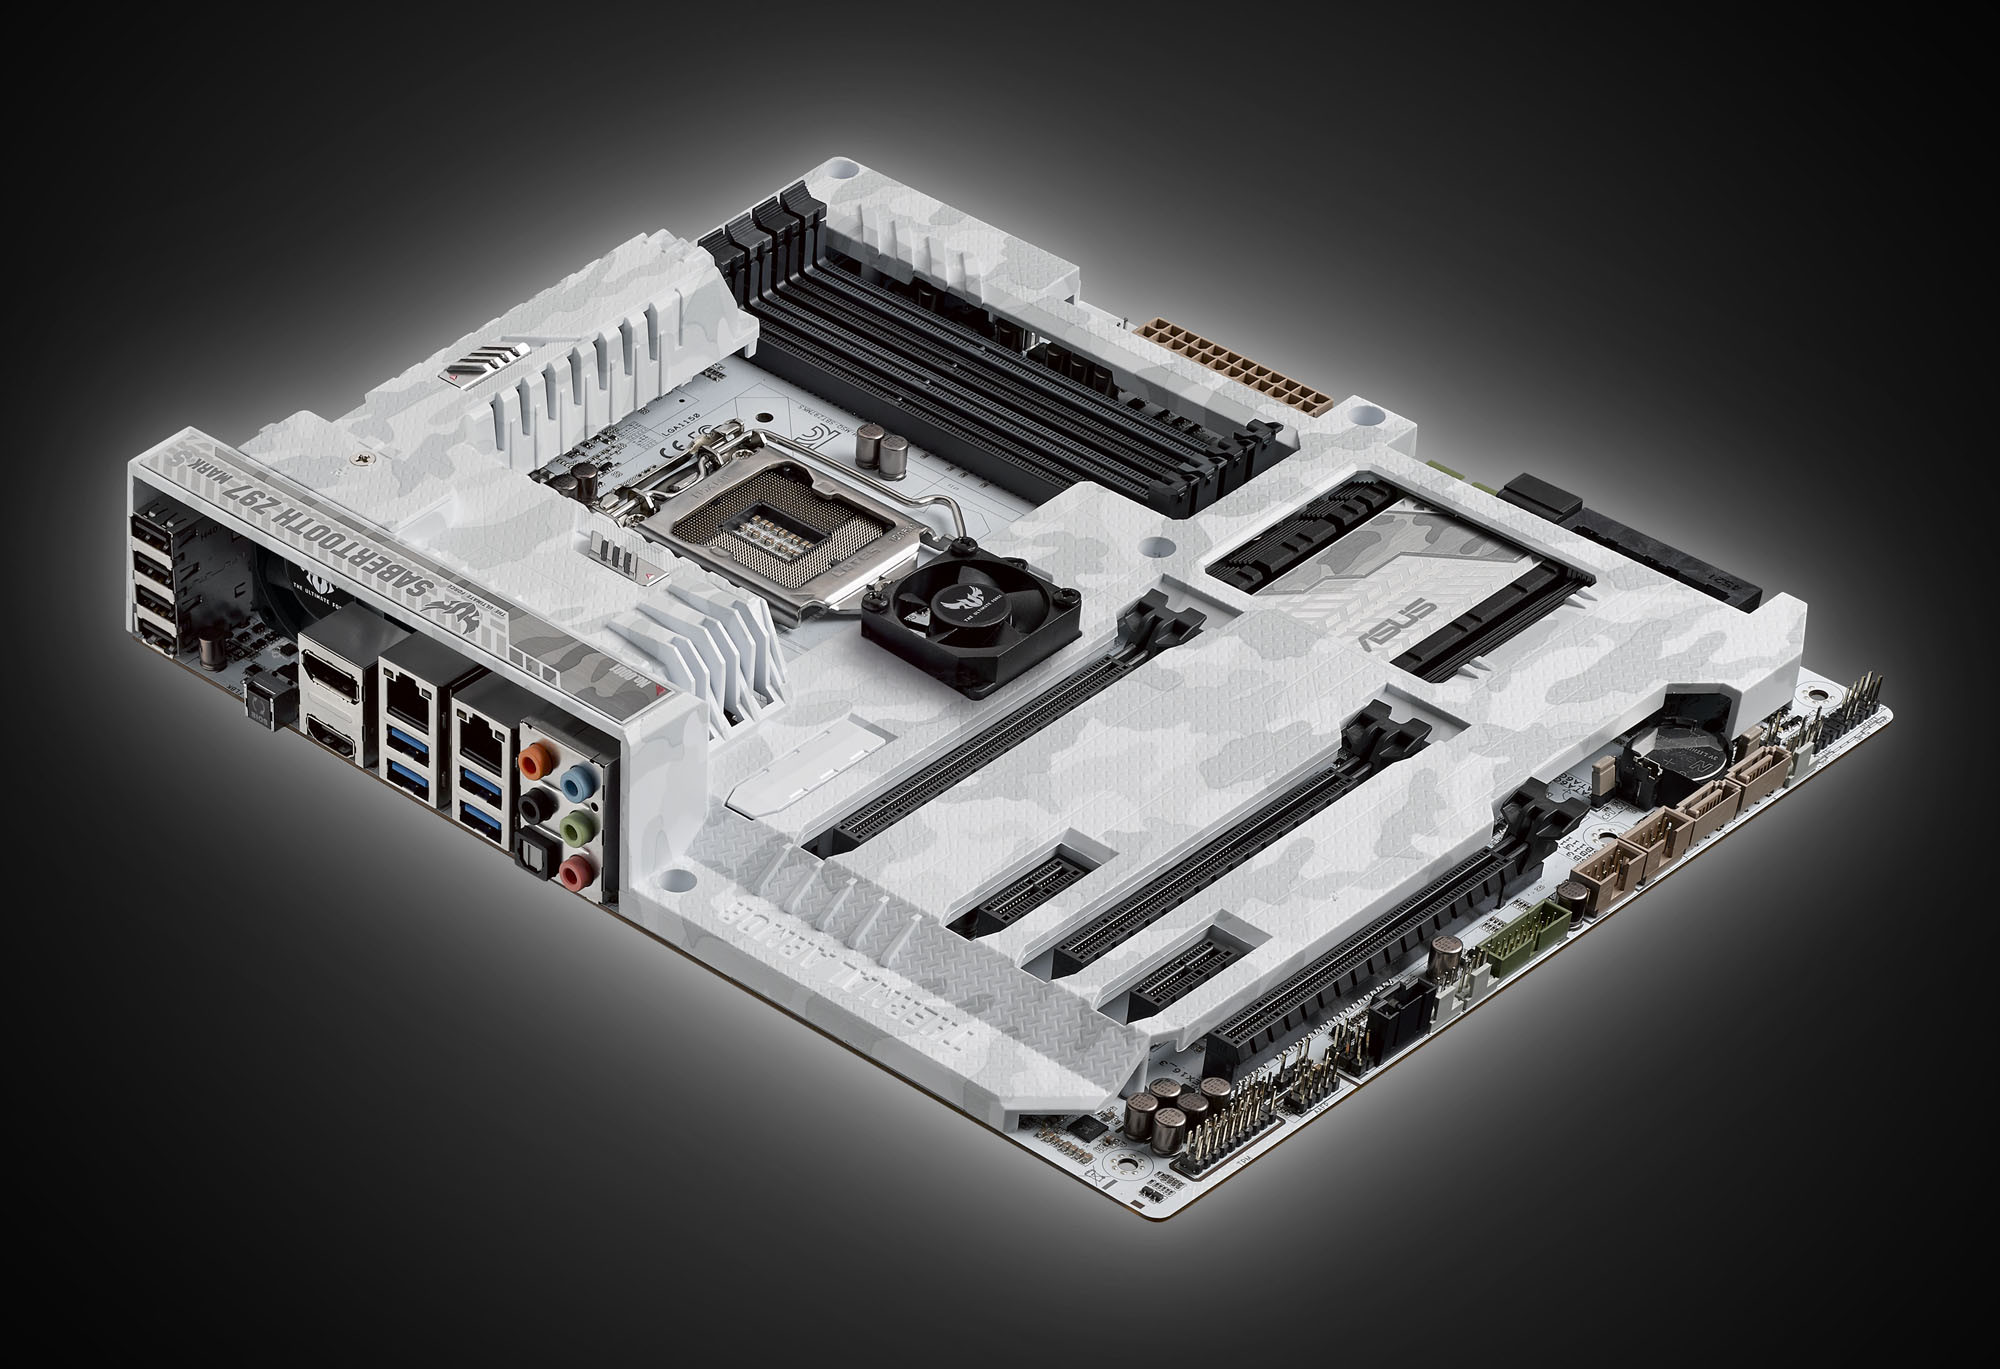 ASUS Announces Limited-Edition TUF Sabertooth Z97 Mark S | techPowerUp